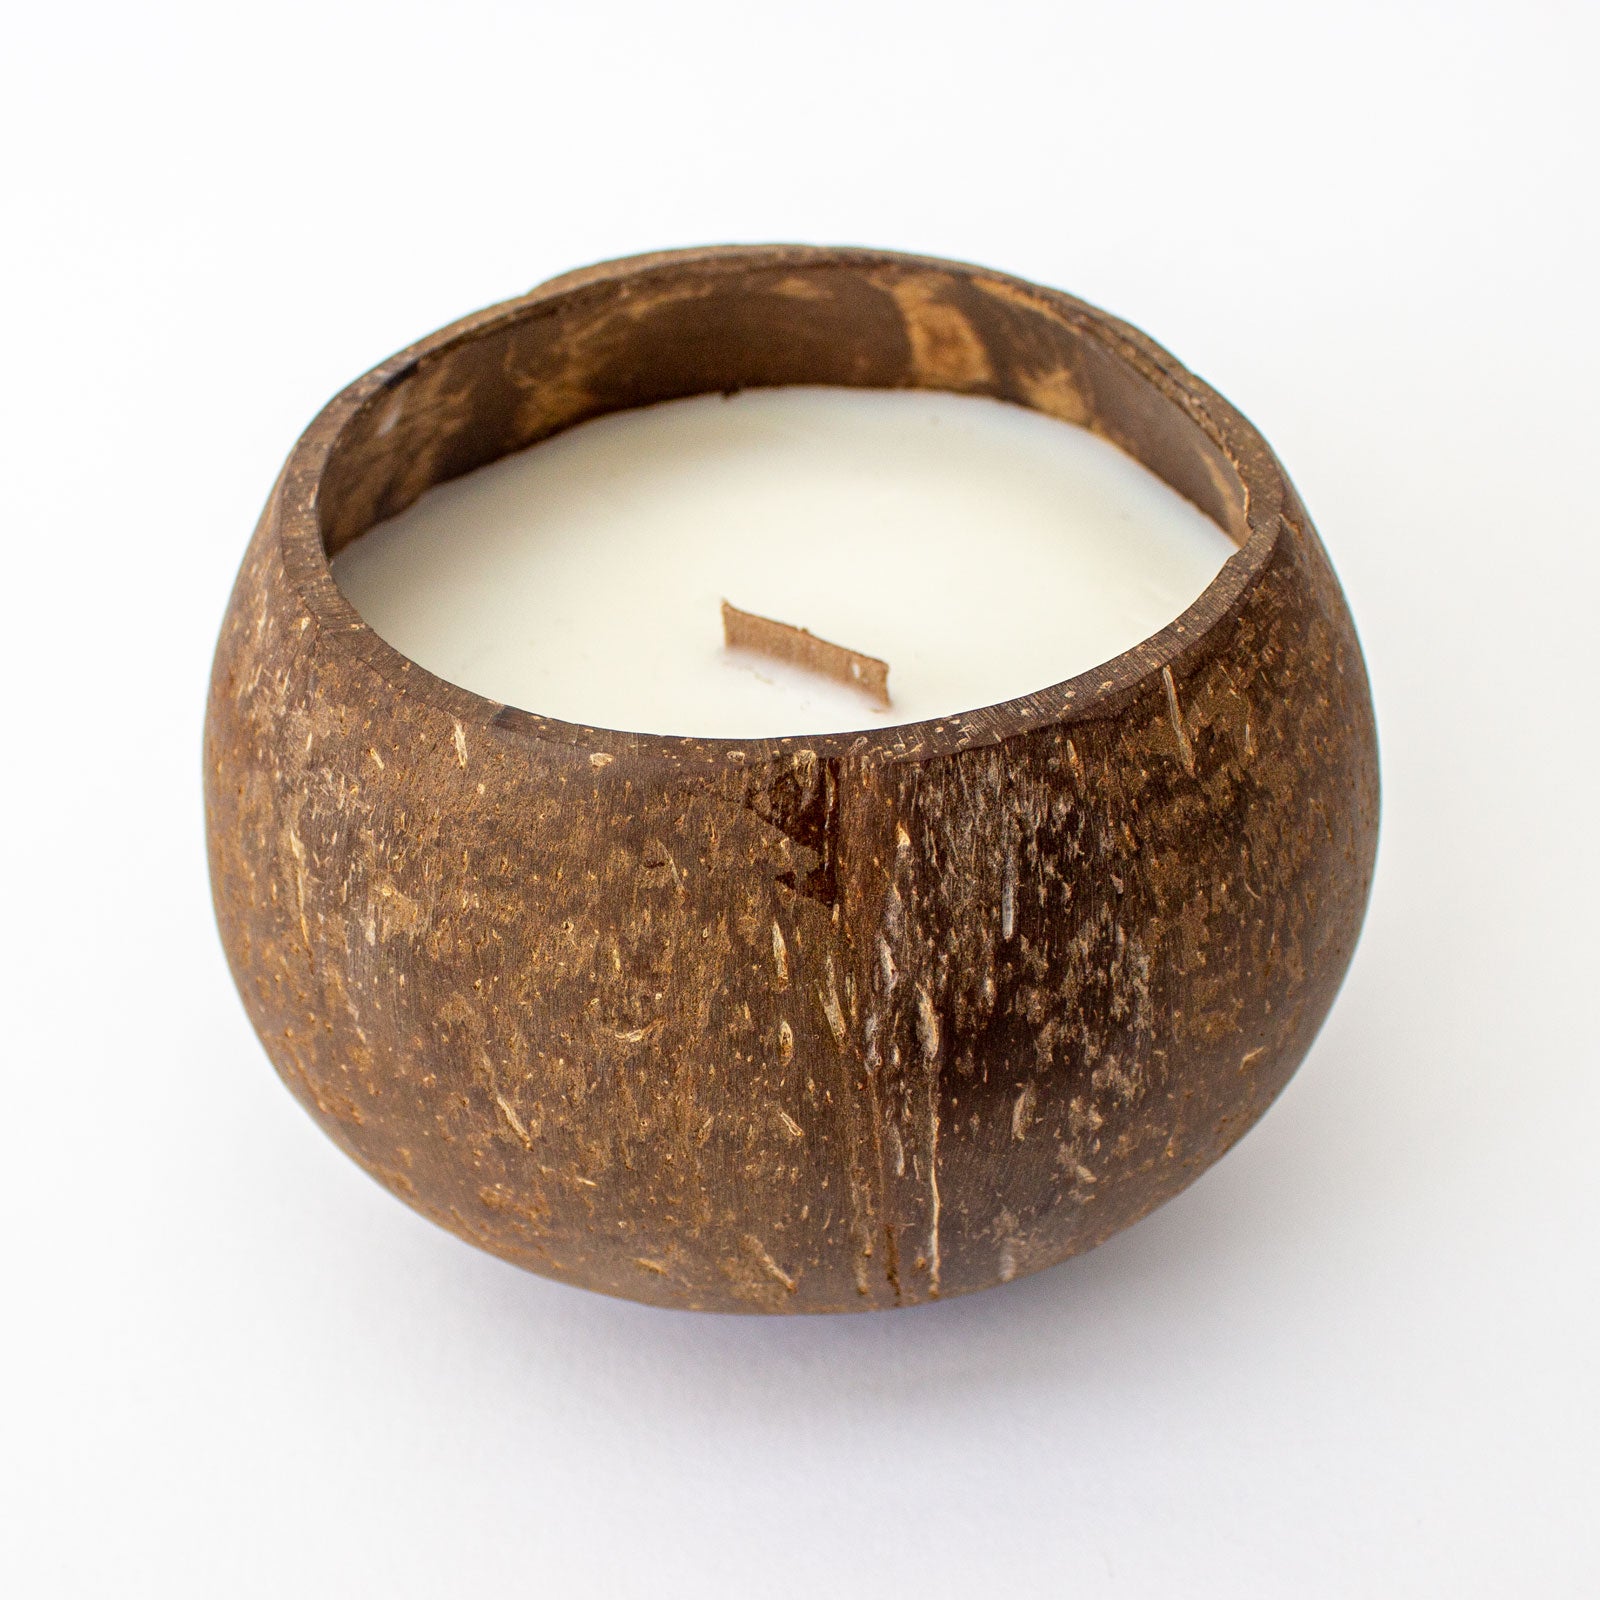 BEST MUM IN THE WORLD - Toasted Coconut Bowl Candle – Soy Wax - Gift Present